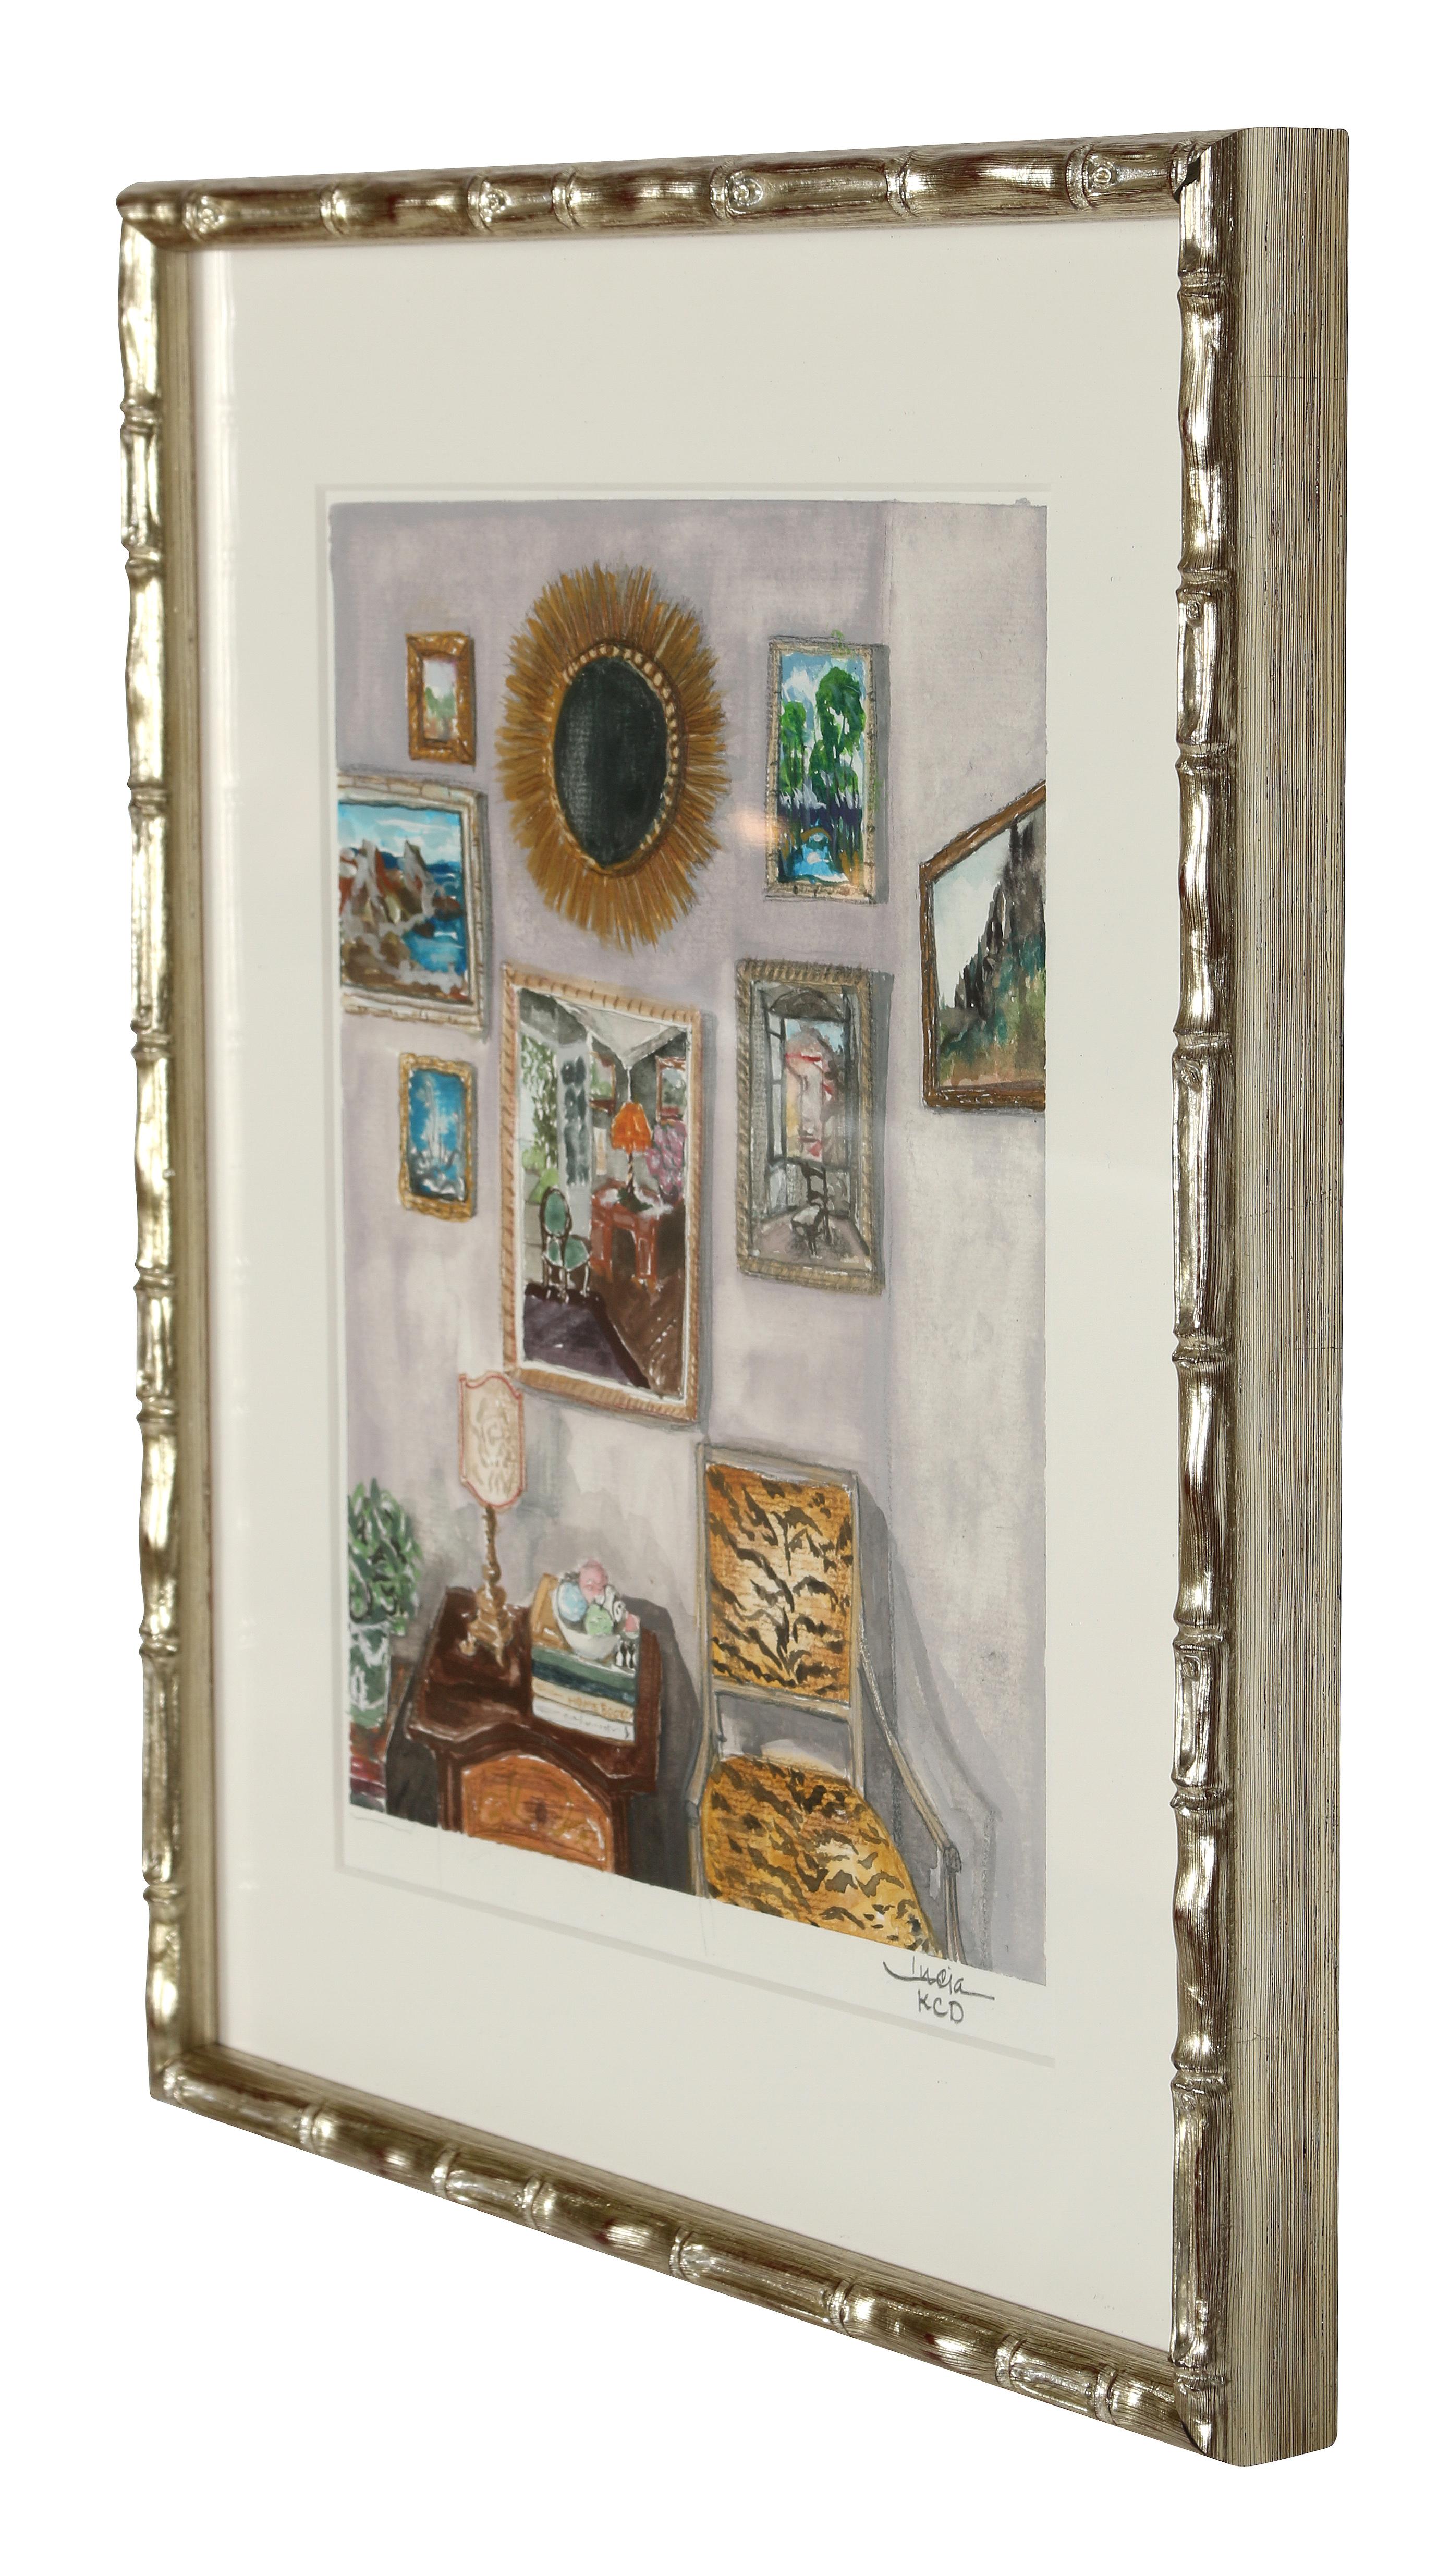 A contemporary watercolor of an Interior vignette with sunburst mirror, matted and finished in a faux bamboo frame.